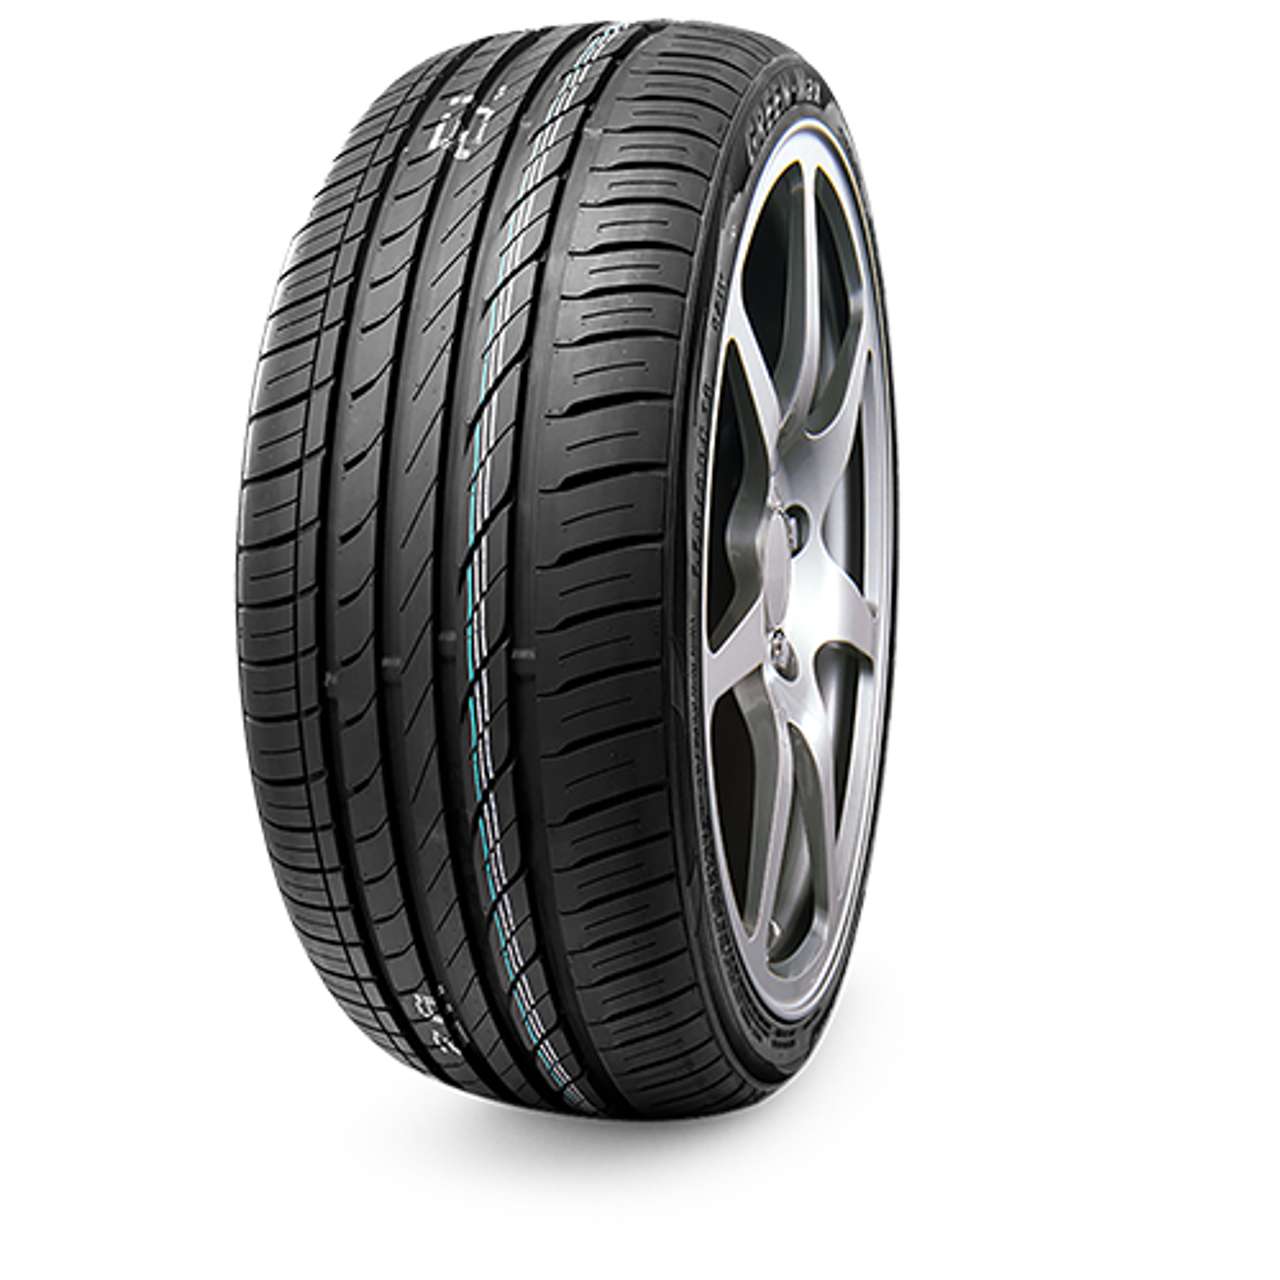 LINGLONG GREEN-MAX 265/35R18 97Y MFS BSW von LINGLONG